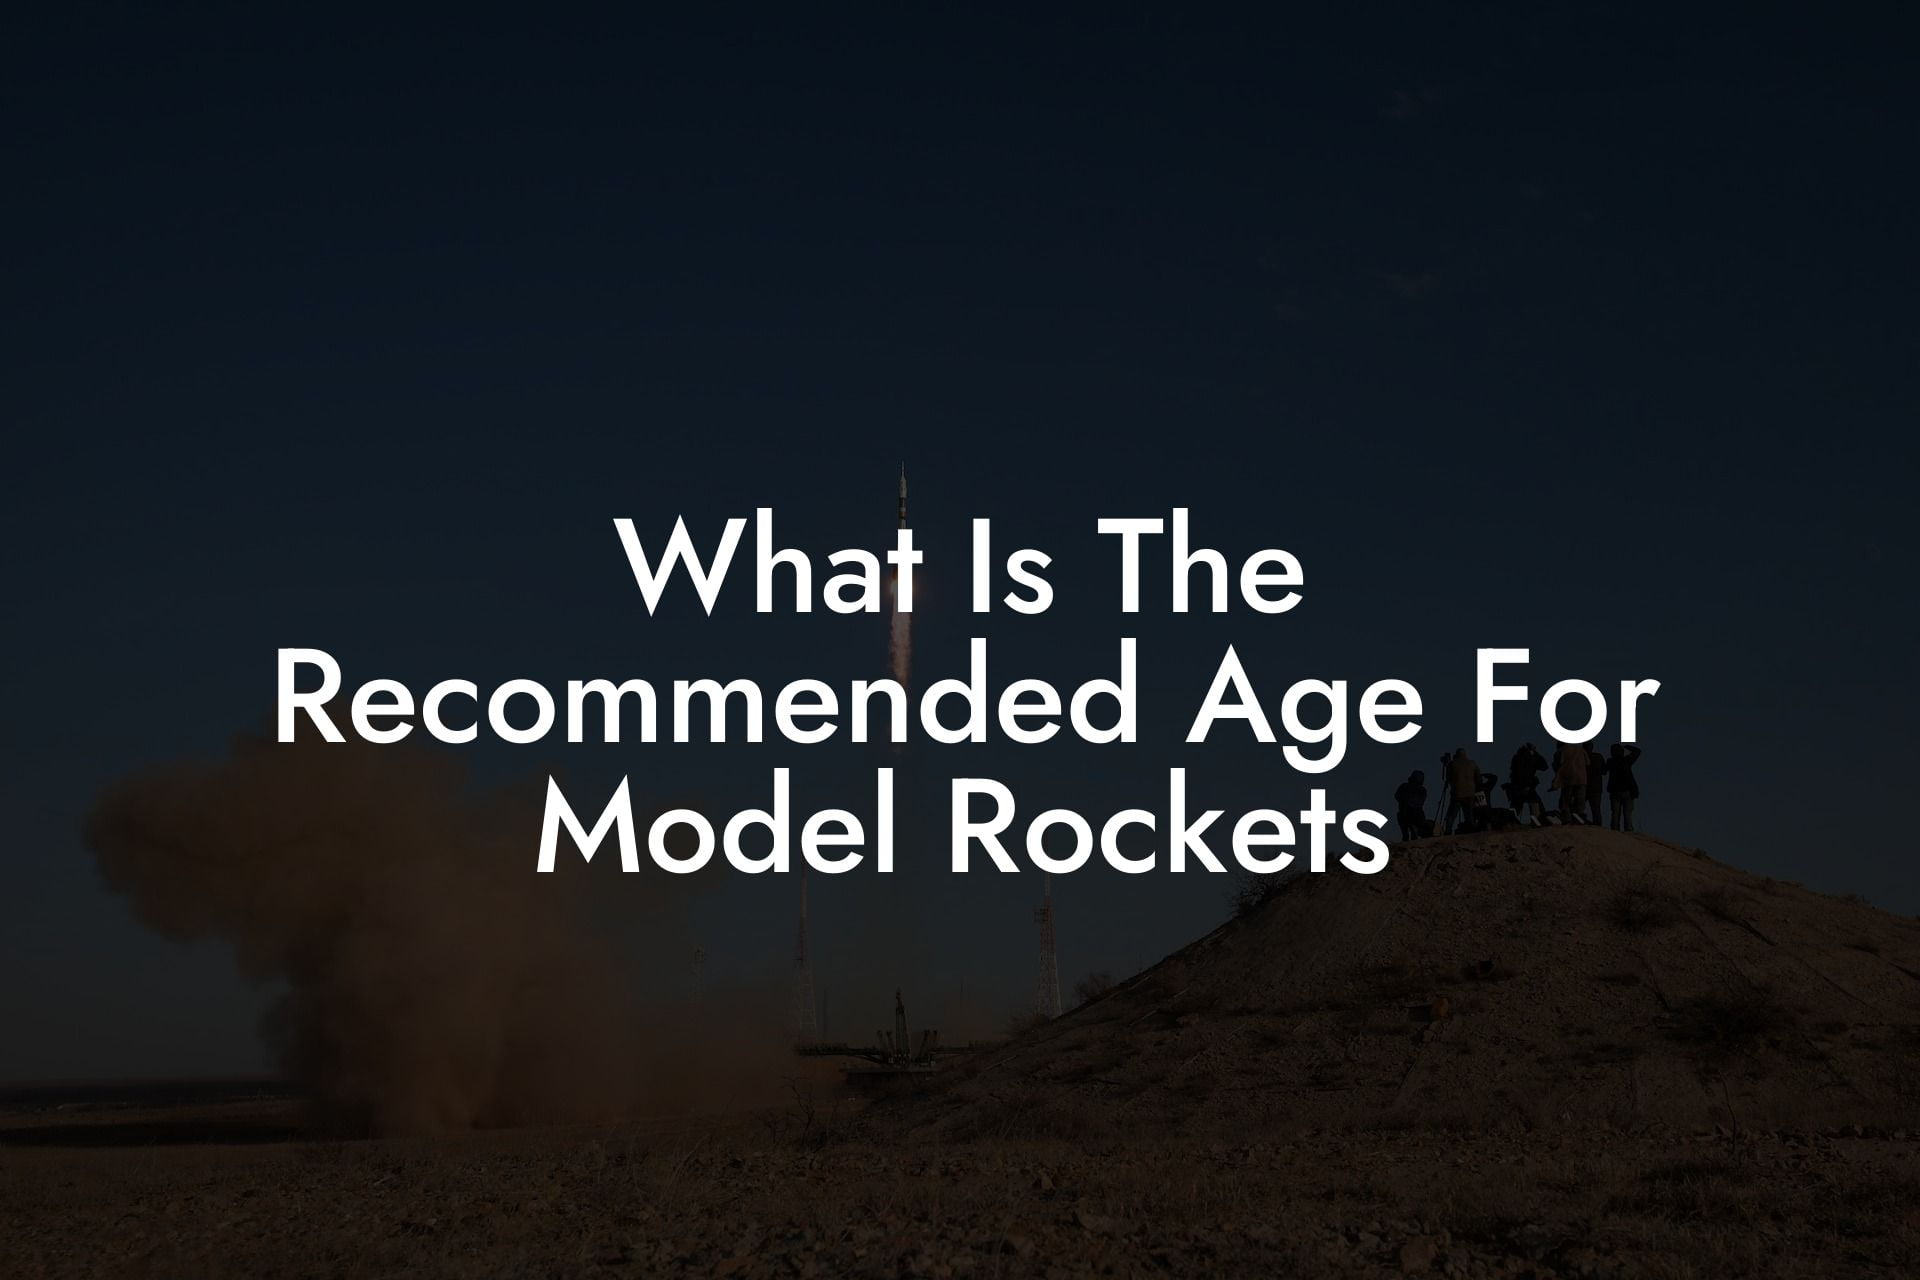 What Is The Recommended Age For Model Rockets